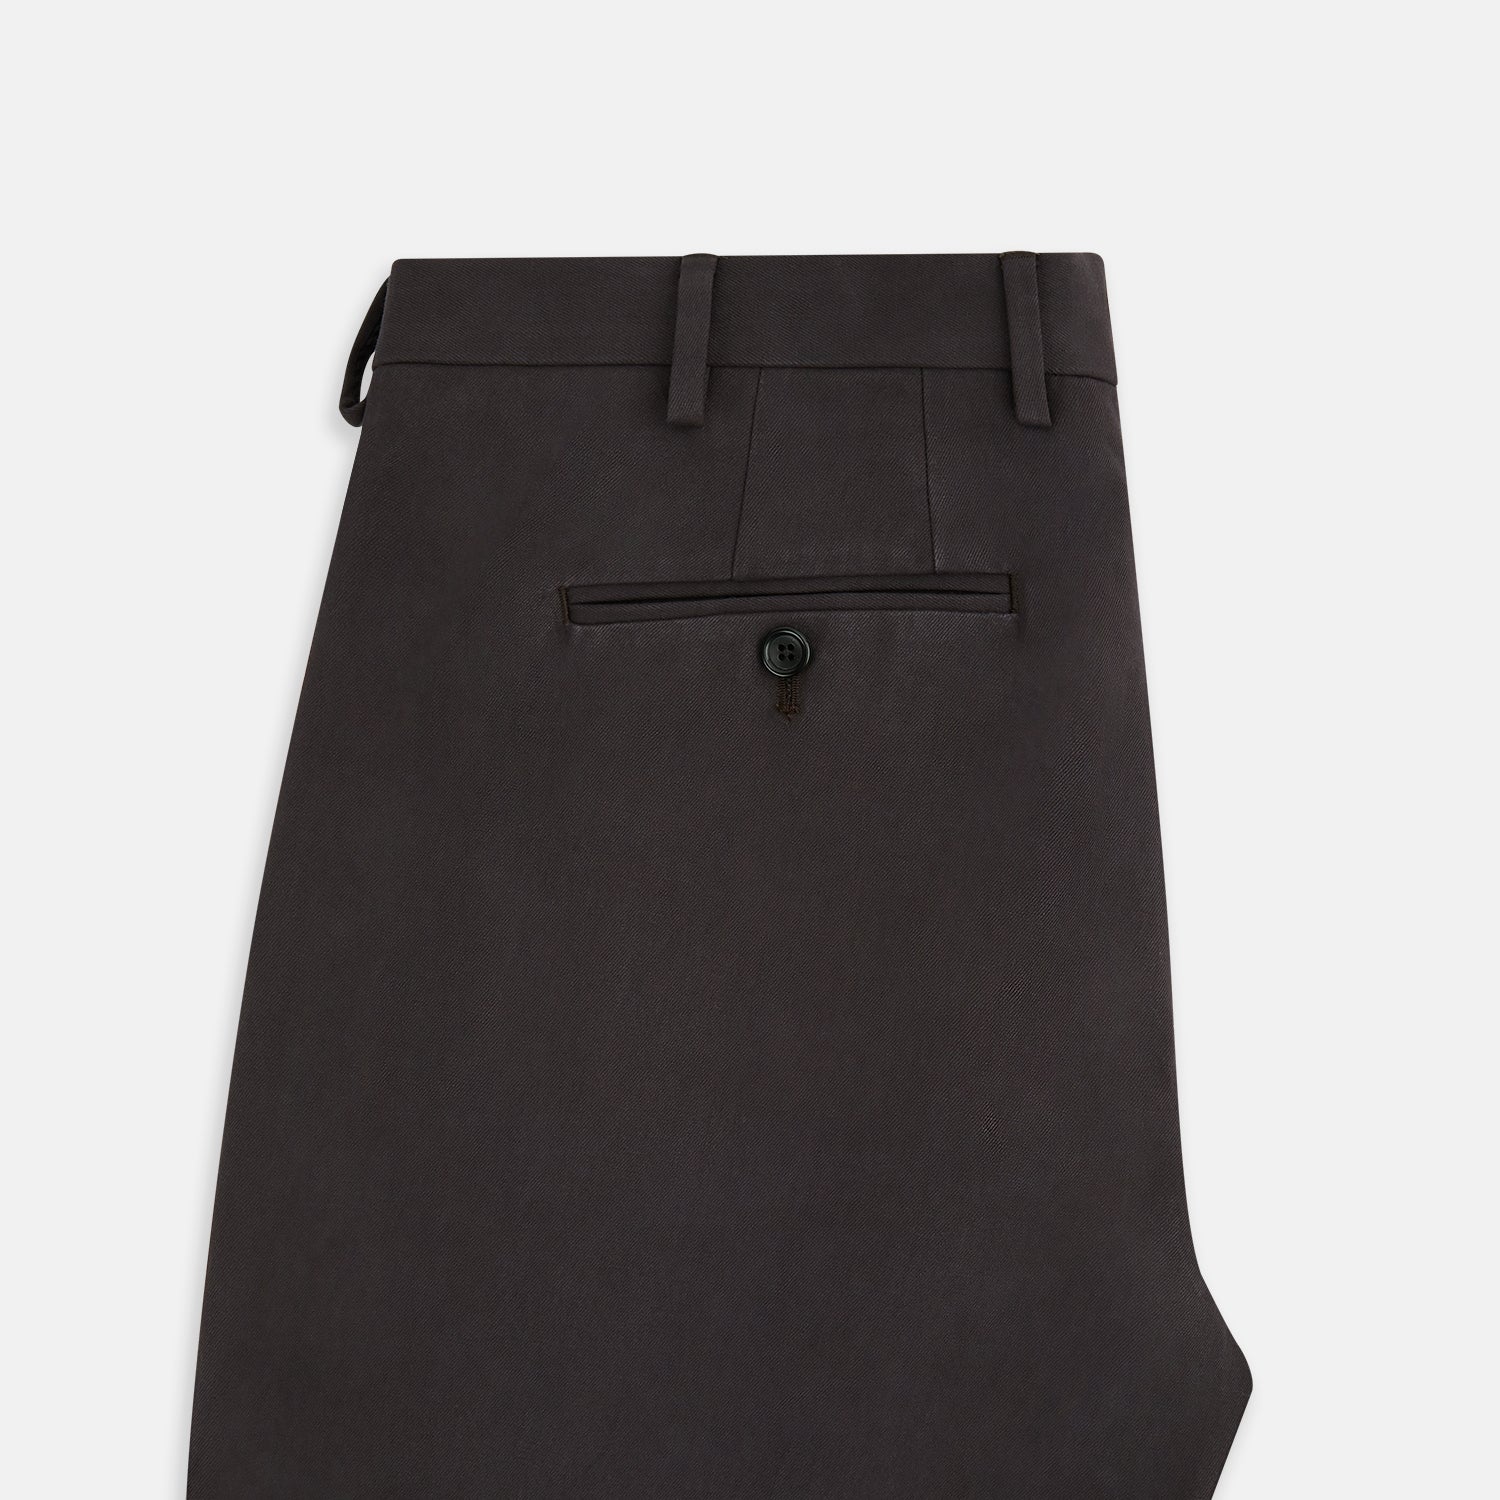 Brown Henry B Trousers